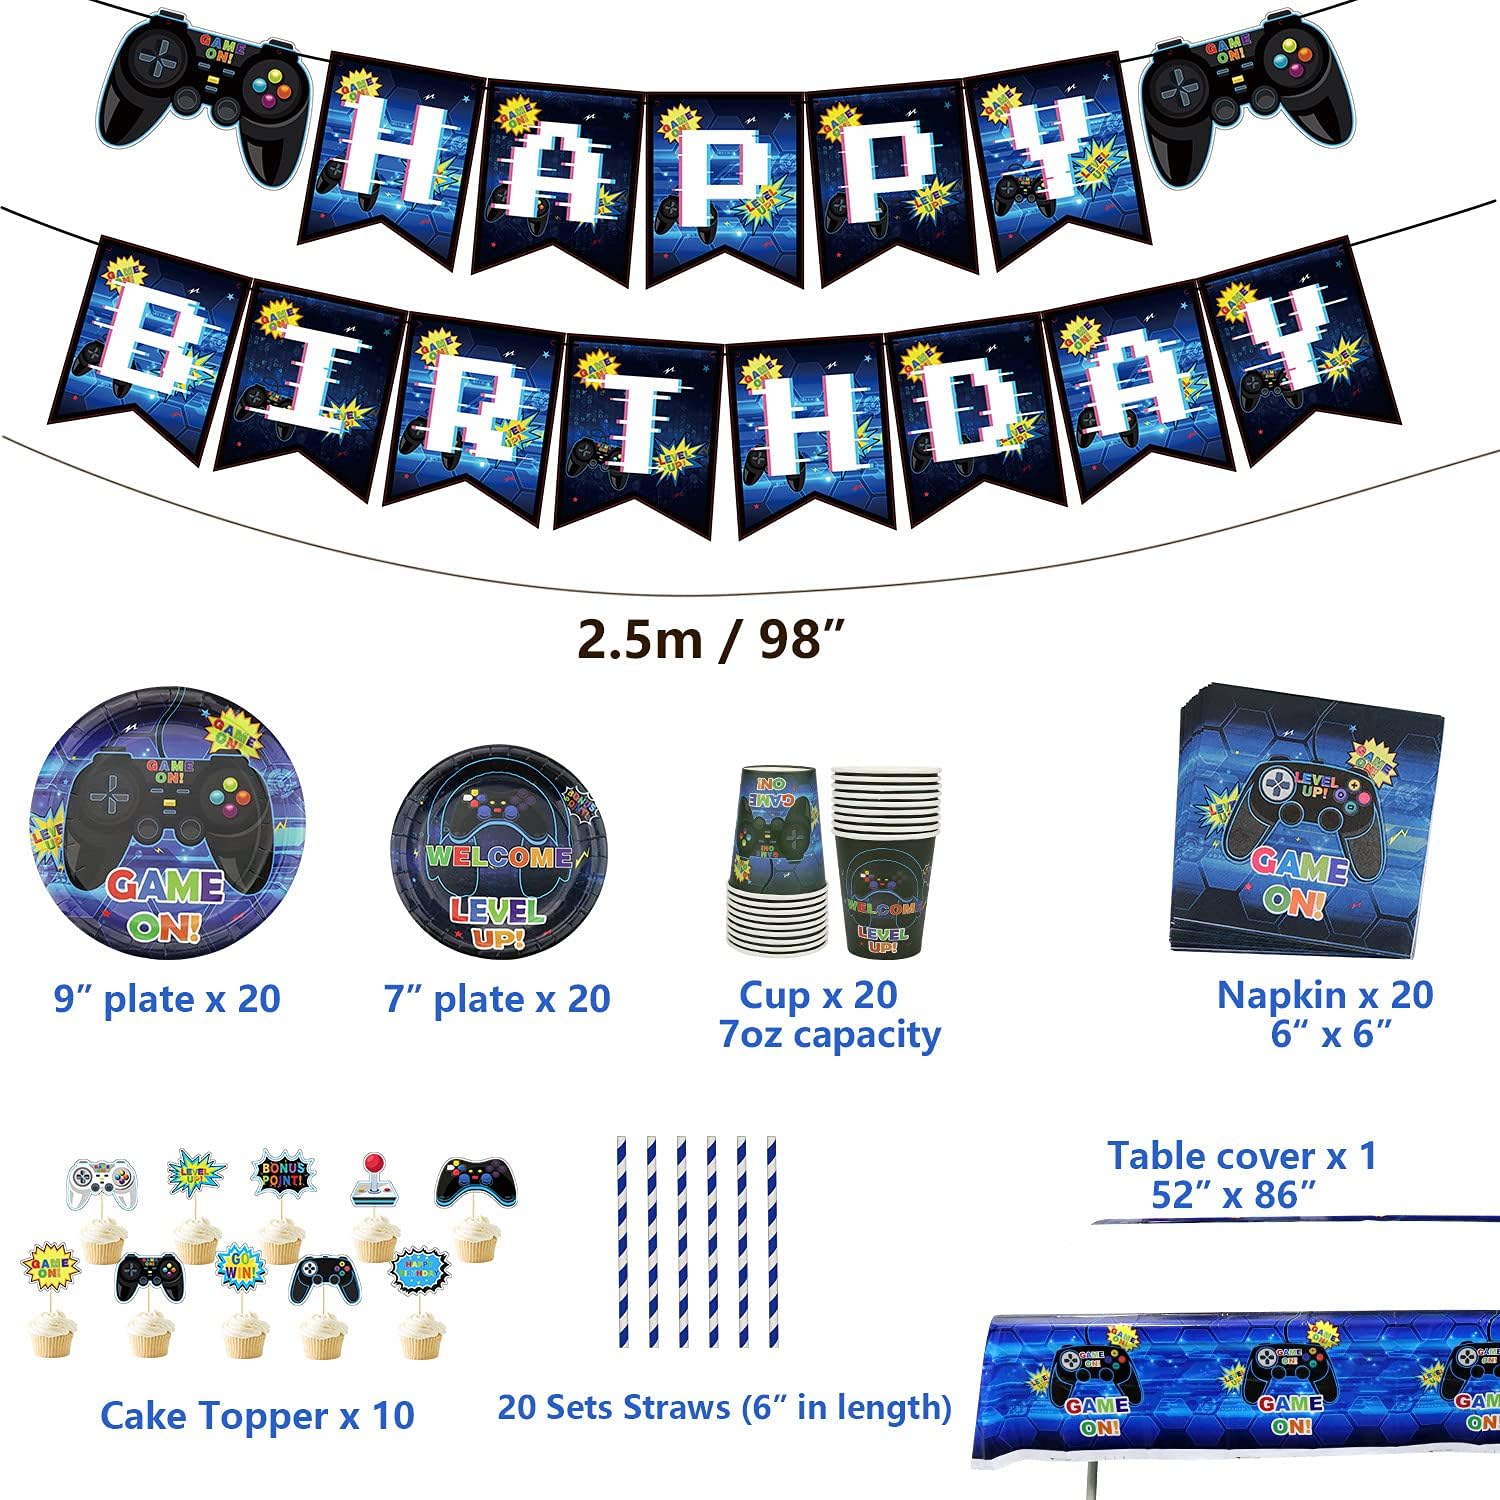 Ywediim Video Game Party Supplies Review